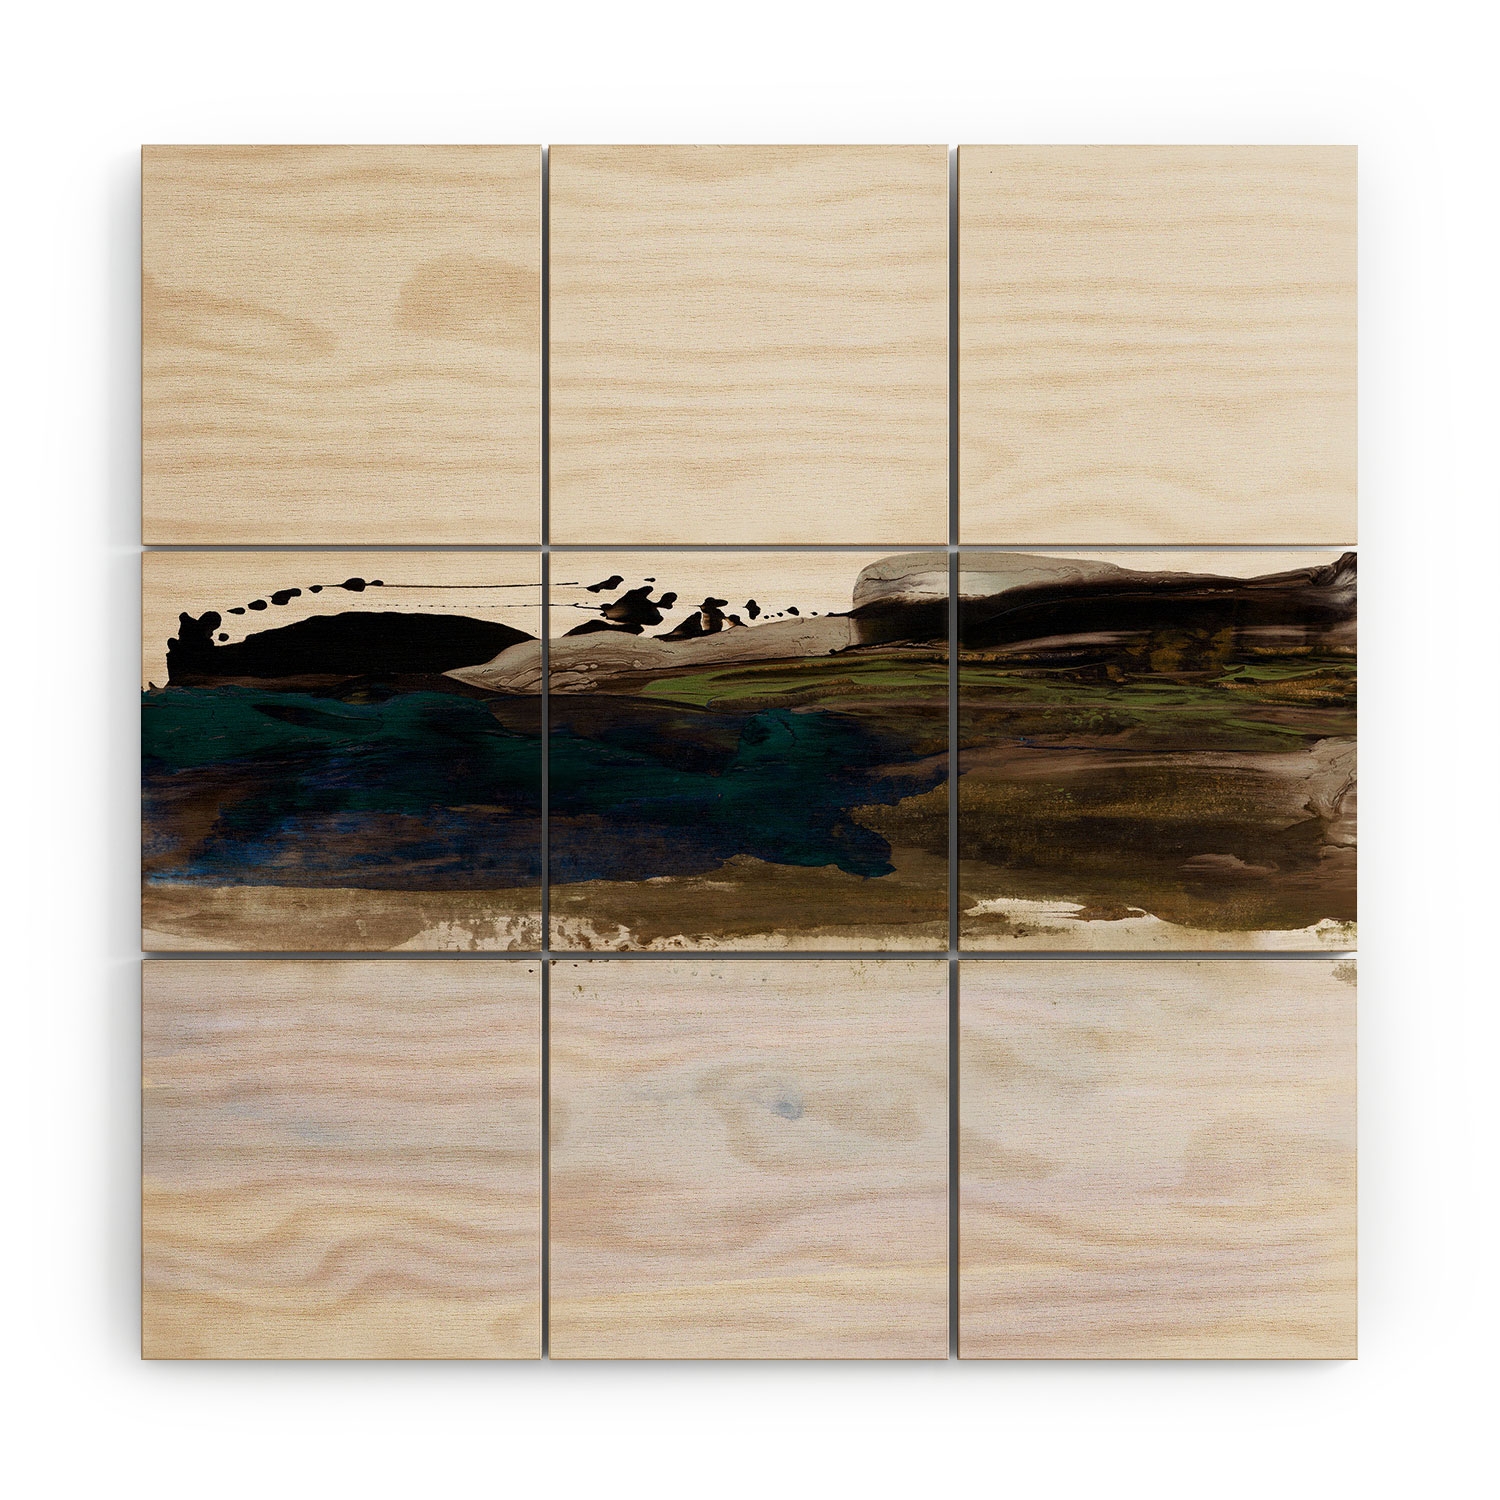 Soulscape 02 by Iris Lehnhardt - Wood Wall Mural5' x 5' (Nine 20" wood Squares) - Image 3